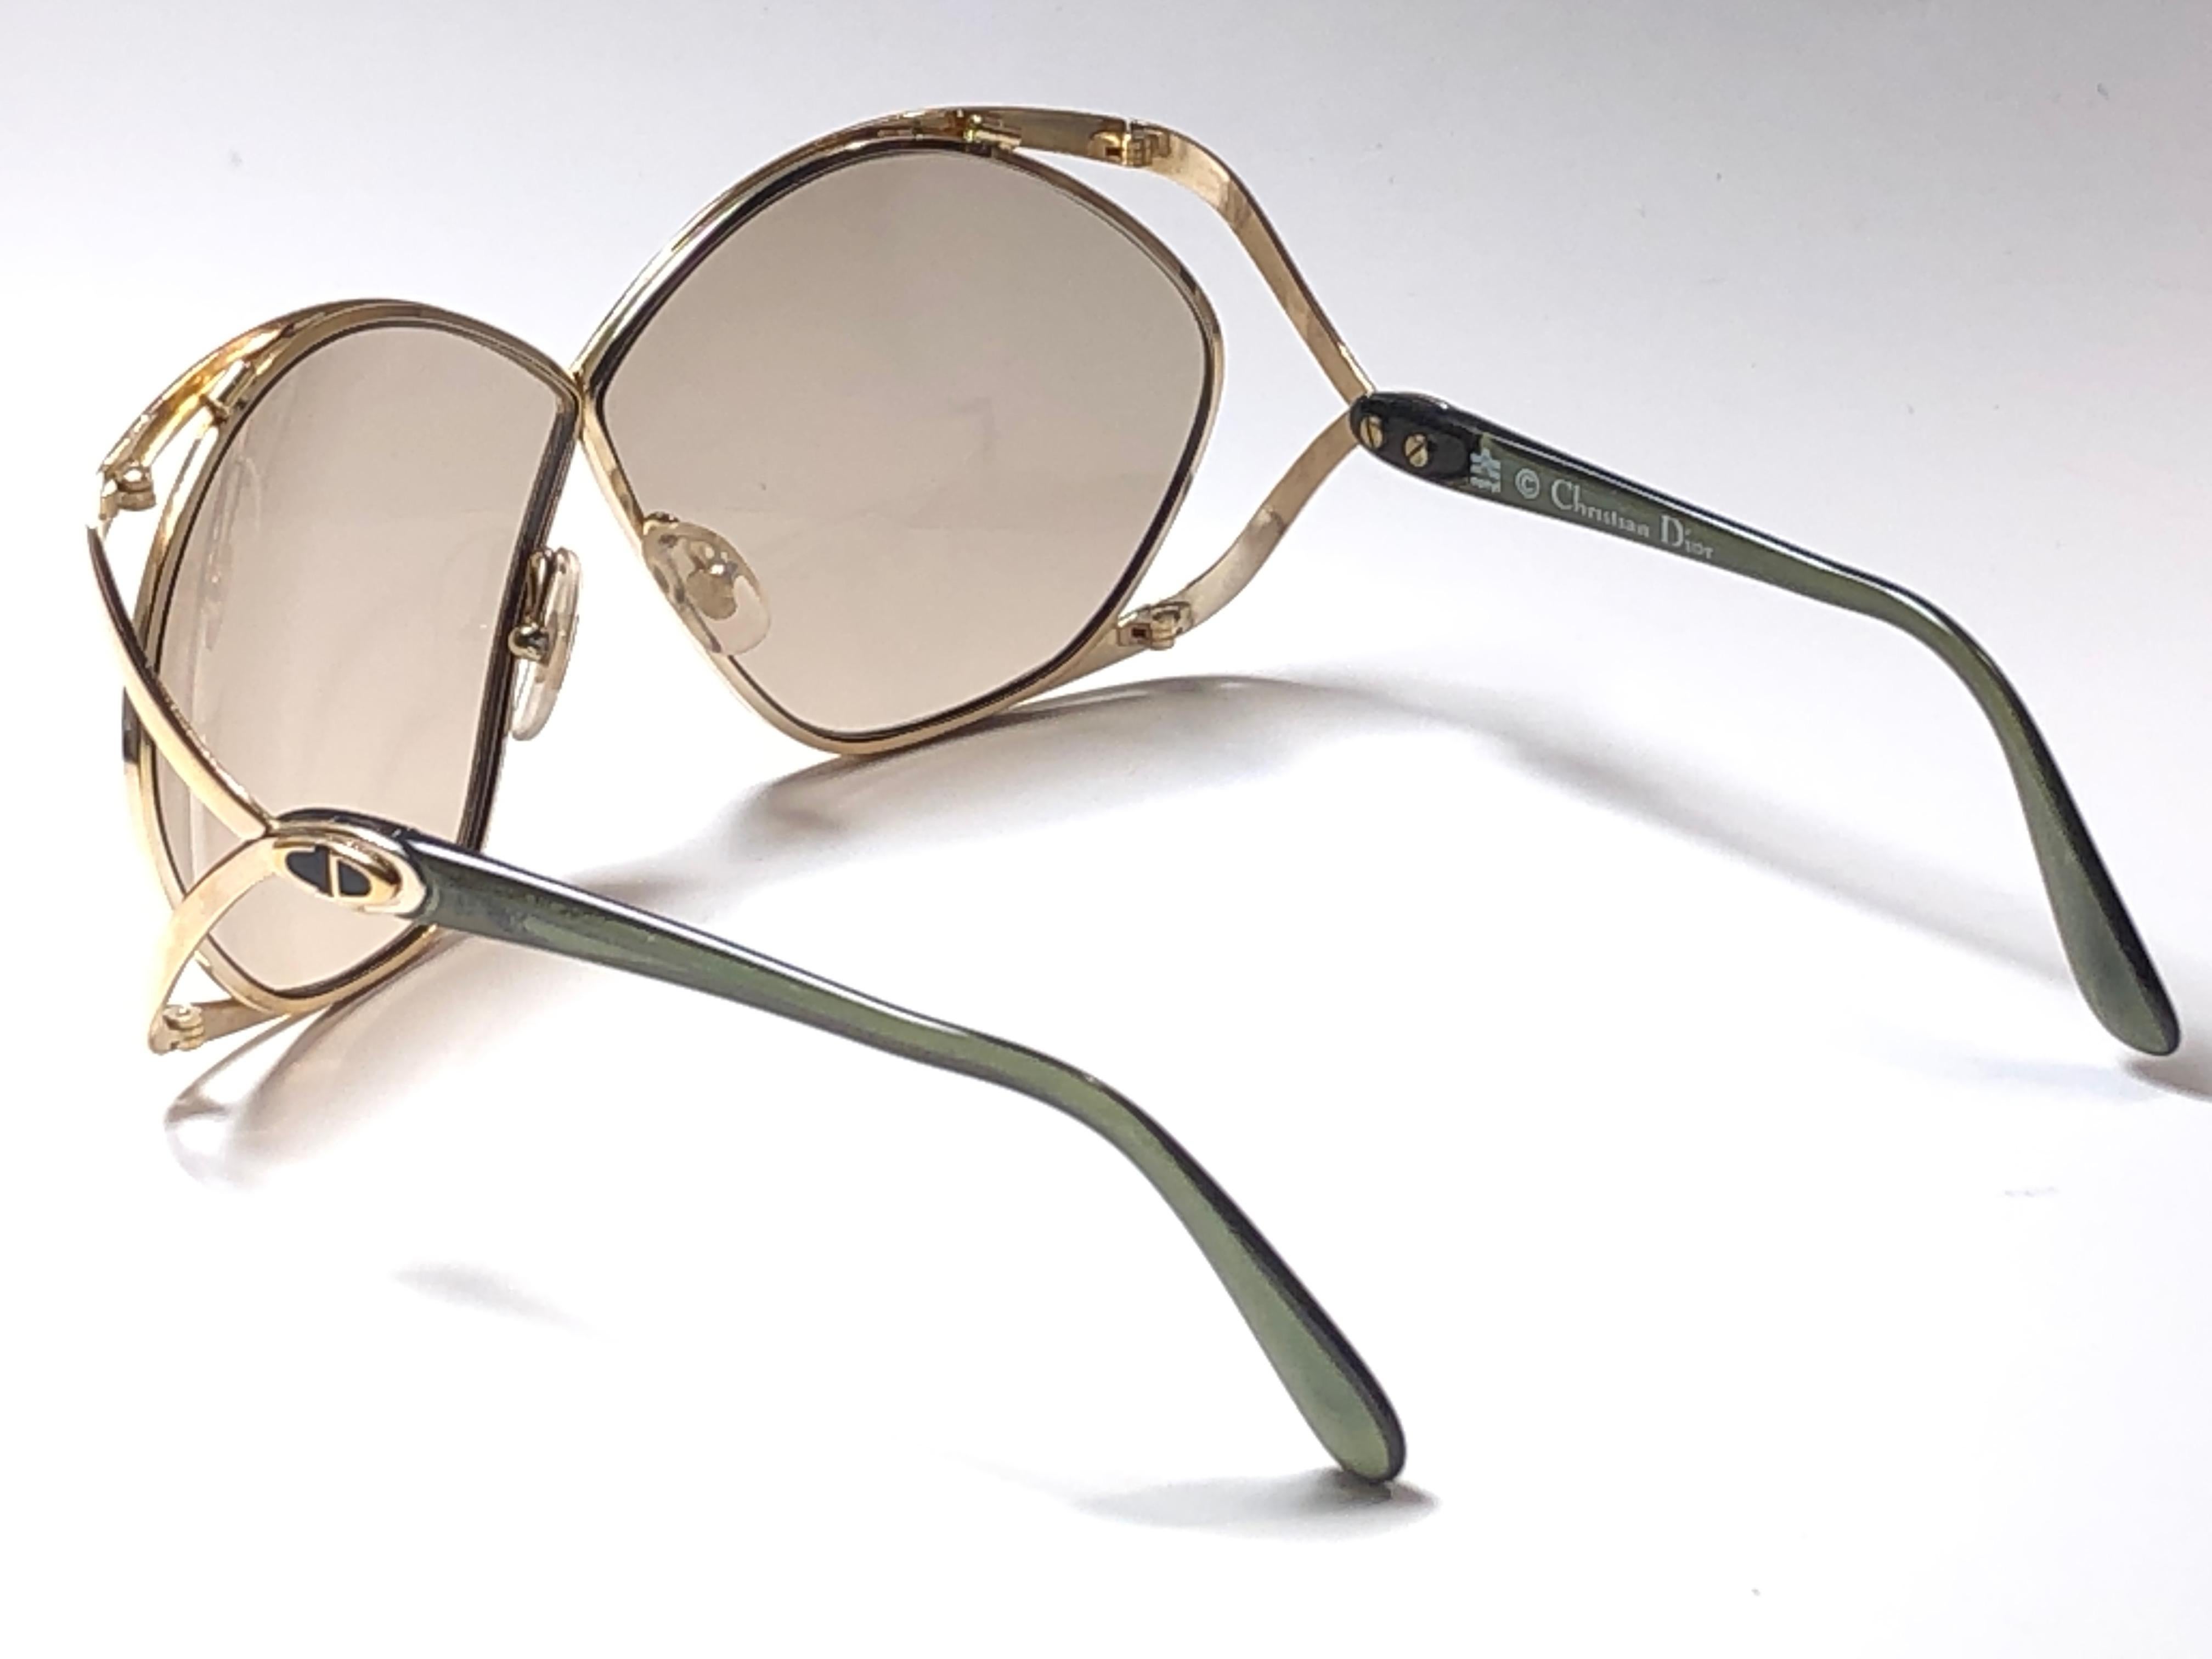 New Vintage Christian Dior 2056 46 Butterfly Translucent Green Sunglasses  at 1stDibs | christian dior 2056 vintage sunglasses, christian dior  butterfly sunglasses, christian dior 2056 sunglasses